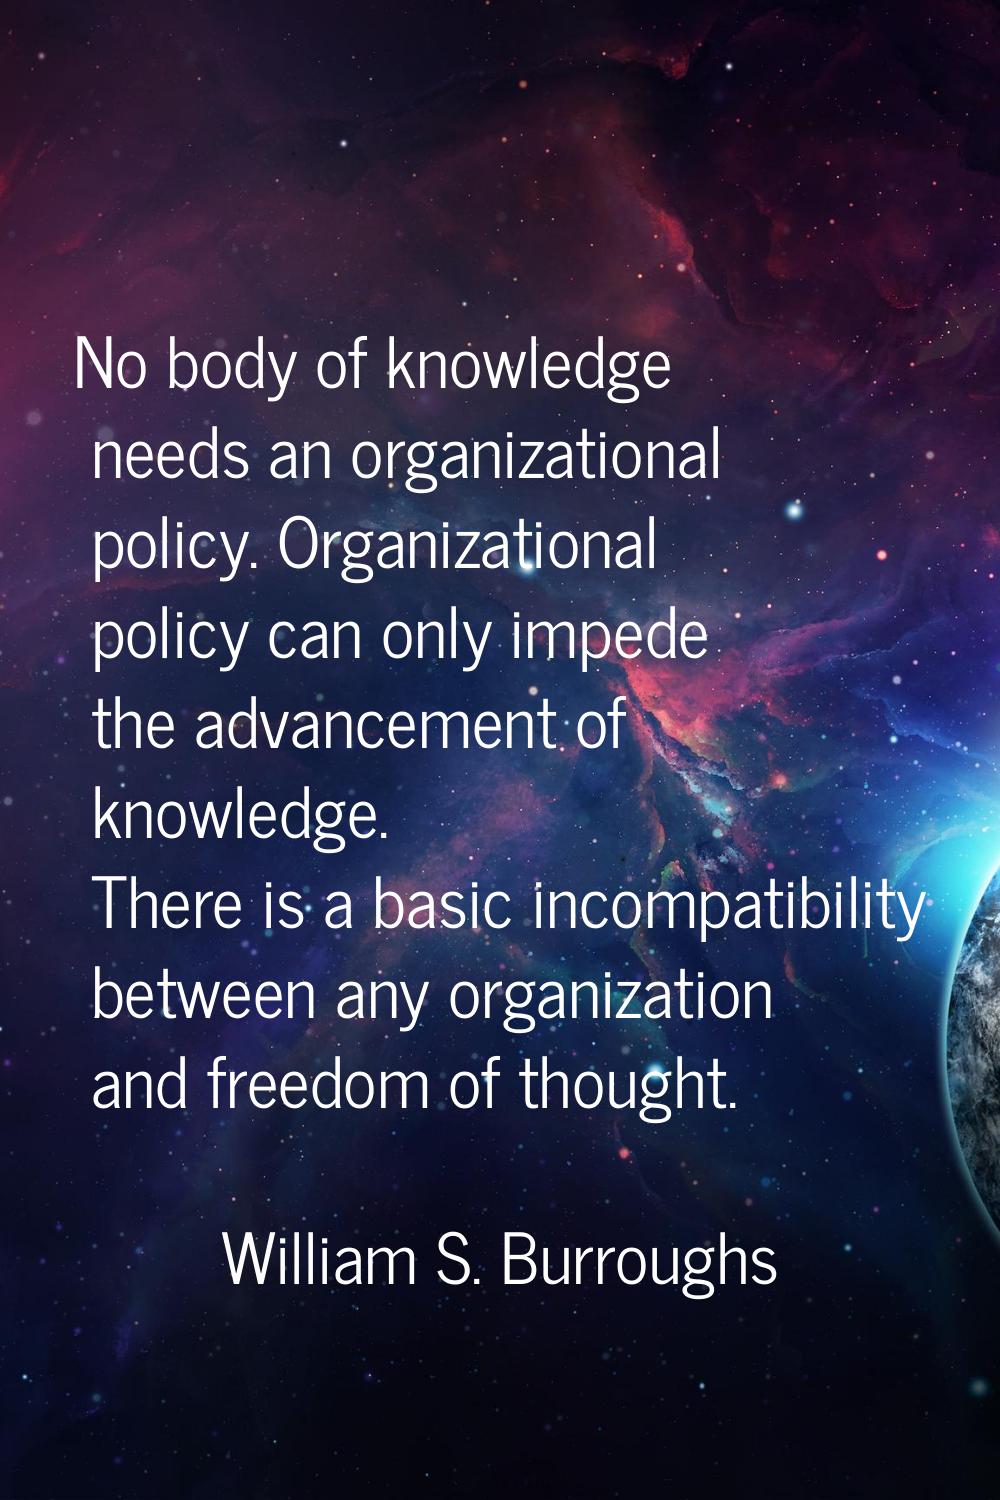 No body of knowledge needs an organizational policy. Organizational policy can only impede the adva